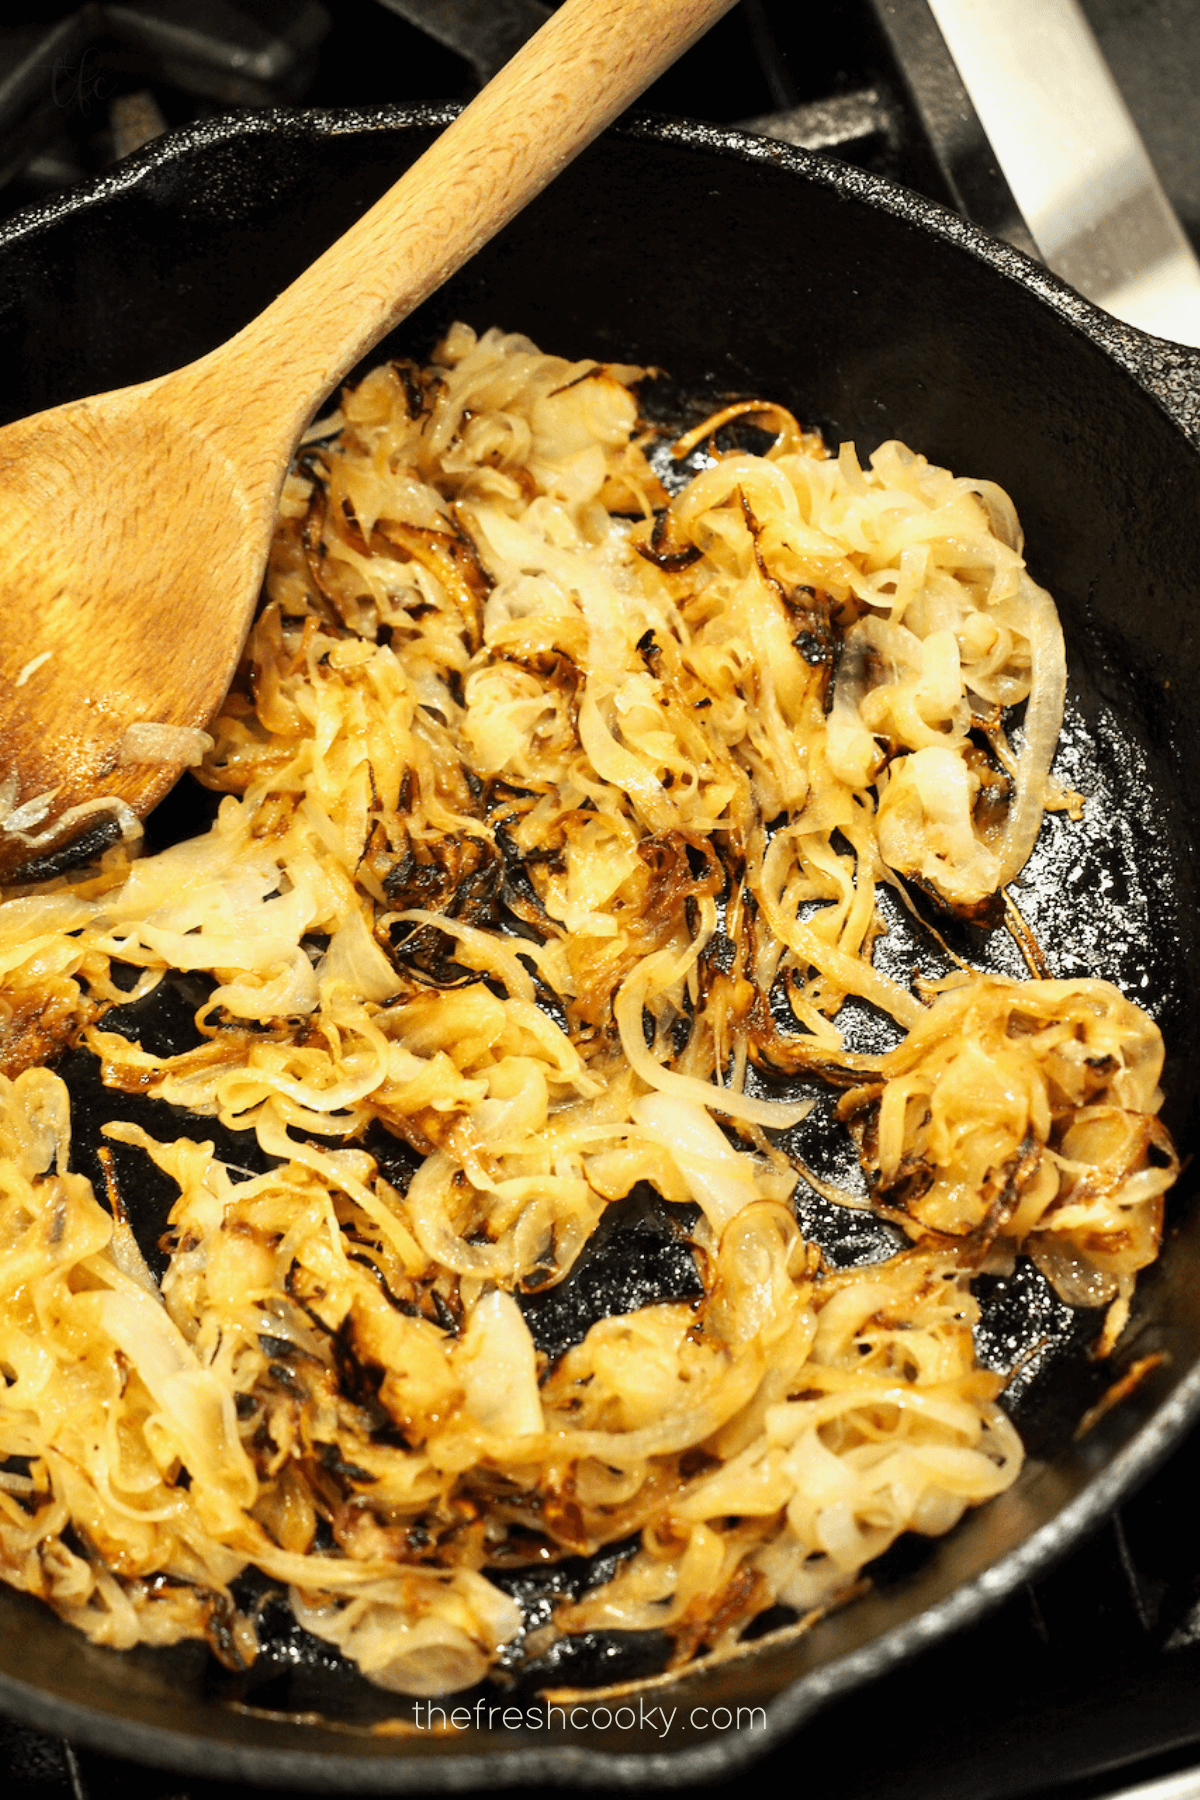 Onions caramelizing in cast iron pan.